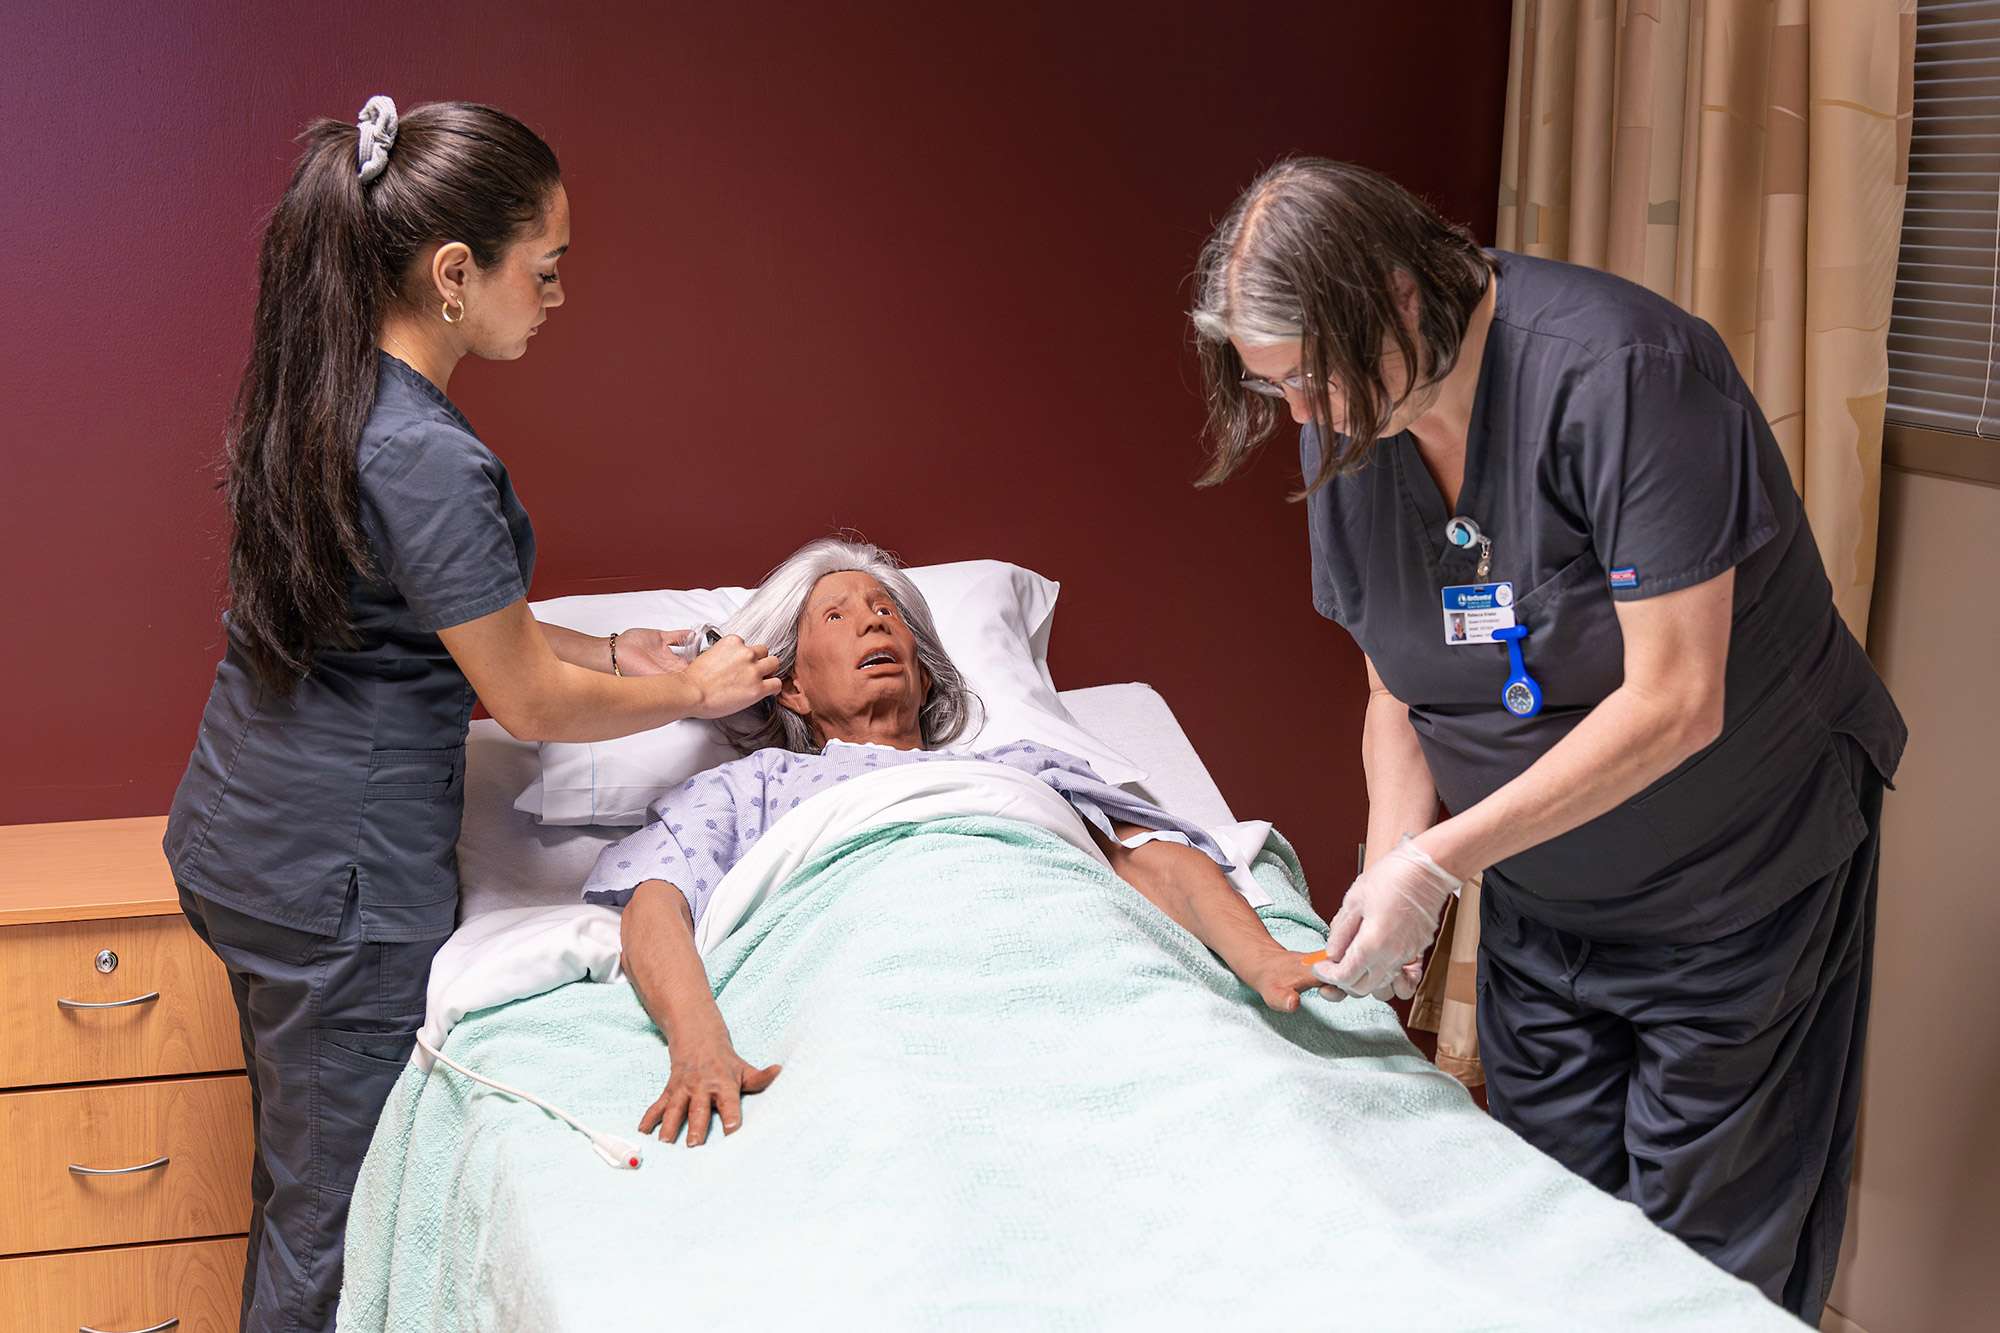 Two Certified Nursing Assistants use an elderly mannequin as practice for brushing hair and teeth.